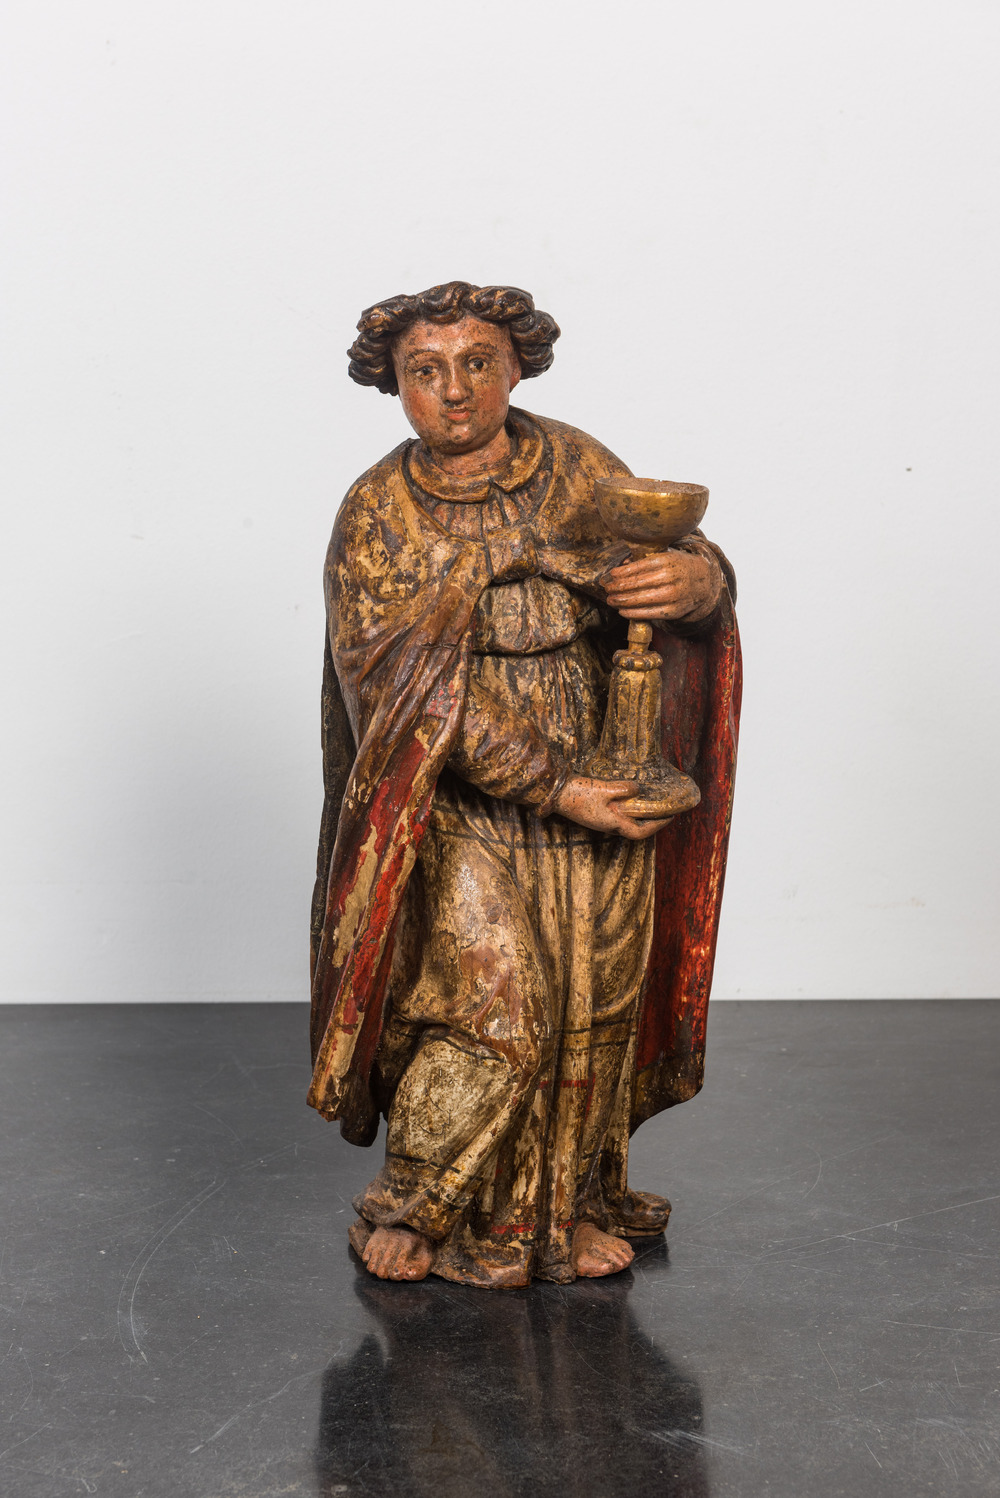 A polychrome wooden figure of John the apostle holding a chalice, 17th C.